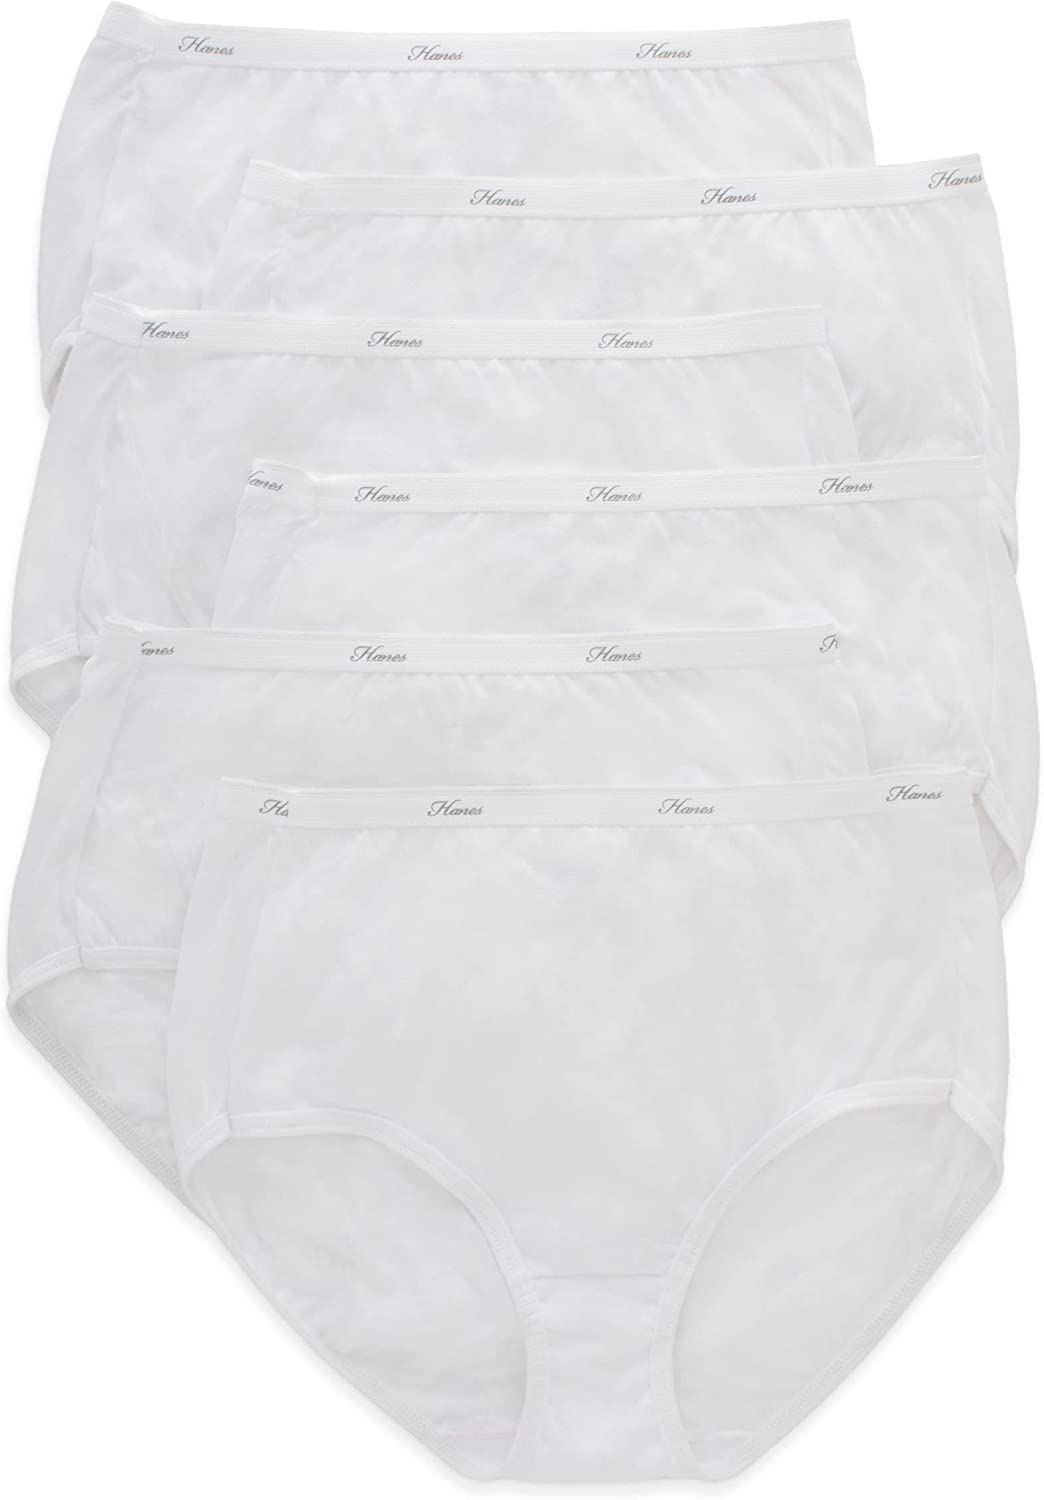 Hanes Womens Cool Comfort Breathable Mesh Briefs 10-Pack, 6